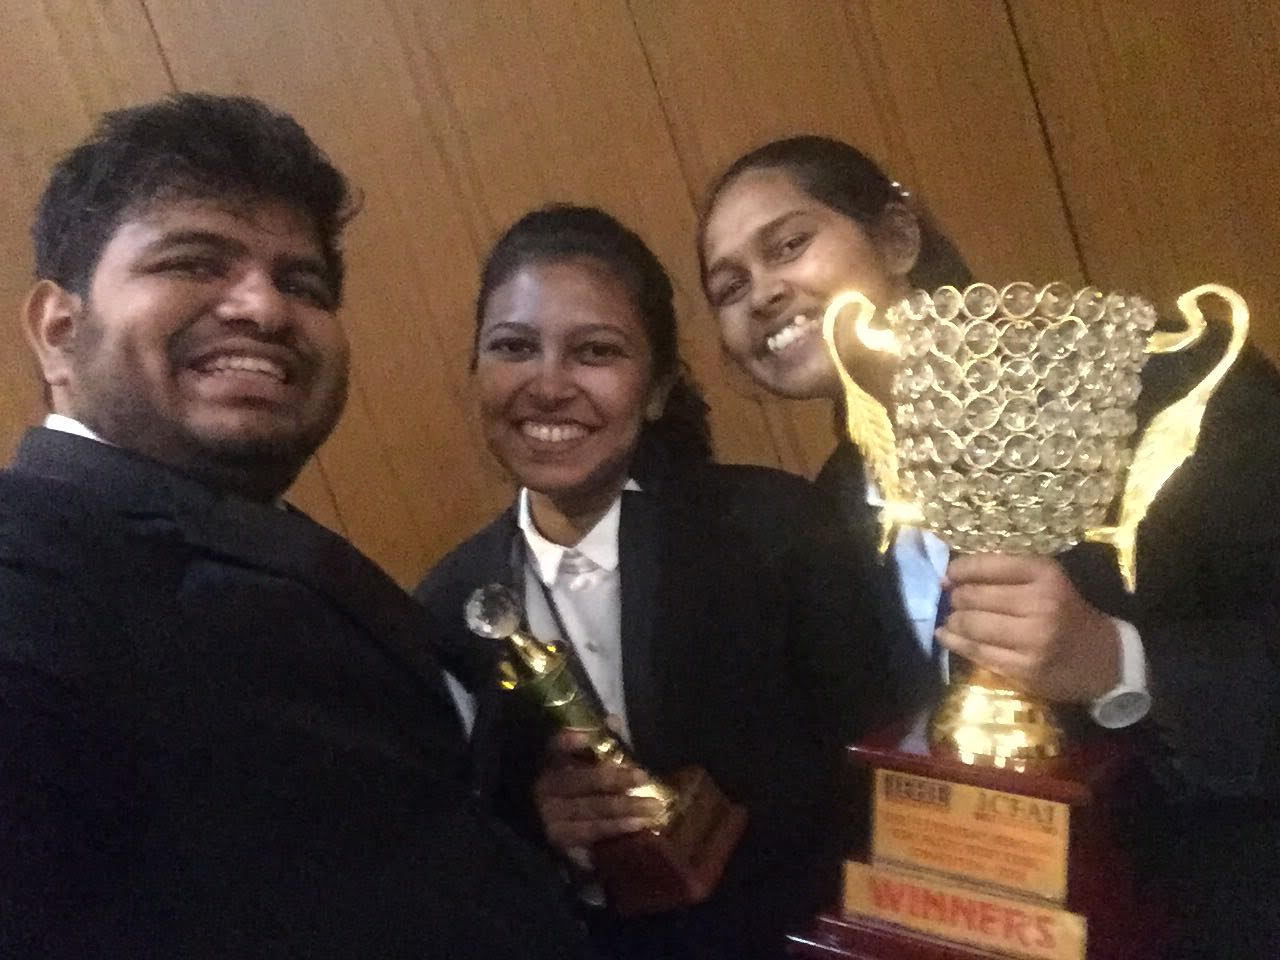 Shri N J Yasaswy Memorial Asia Pacific Moot Court competition 2018